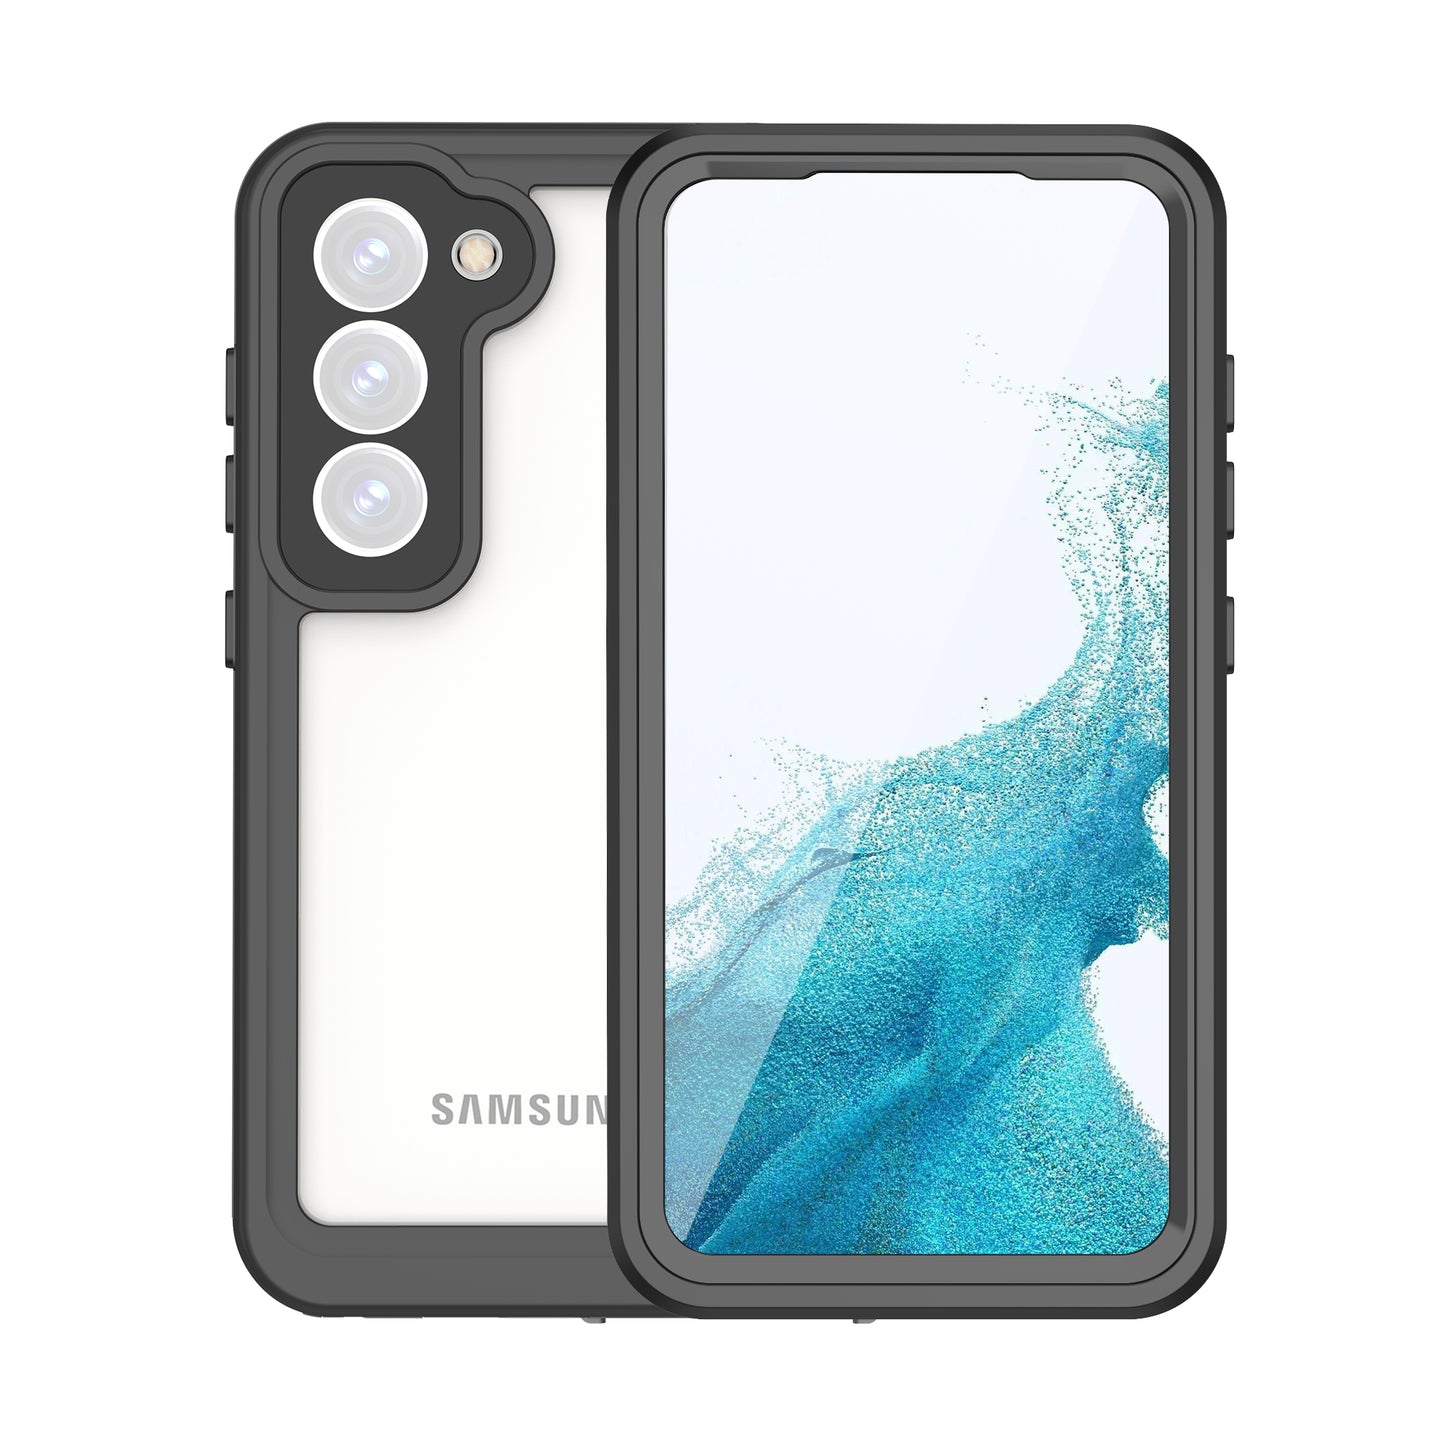 Samsung Galaxy S23+ Case Waterproof Submerged Underwater 6.6ft Clear Full Body Protective